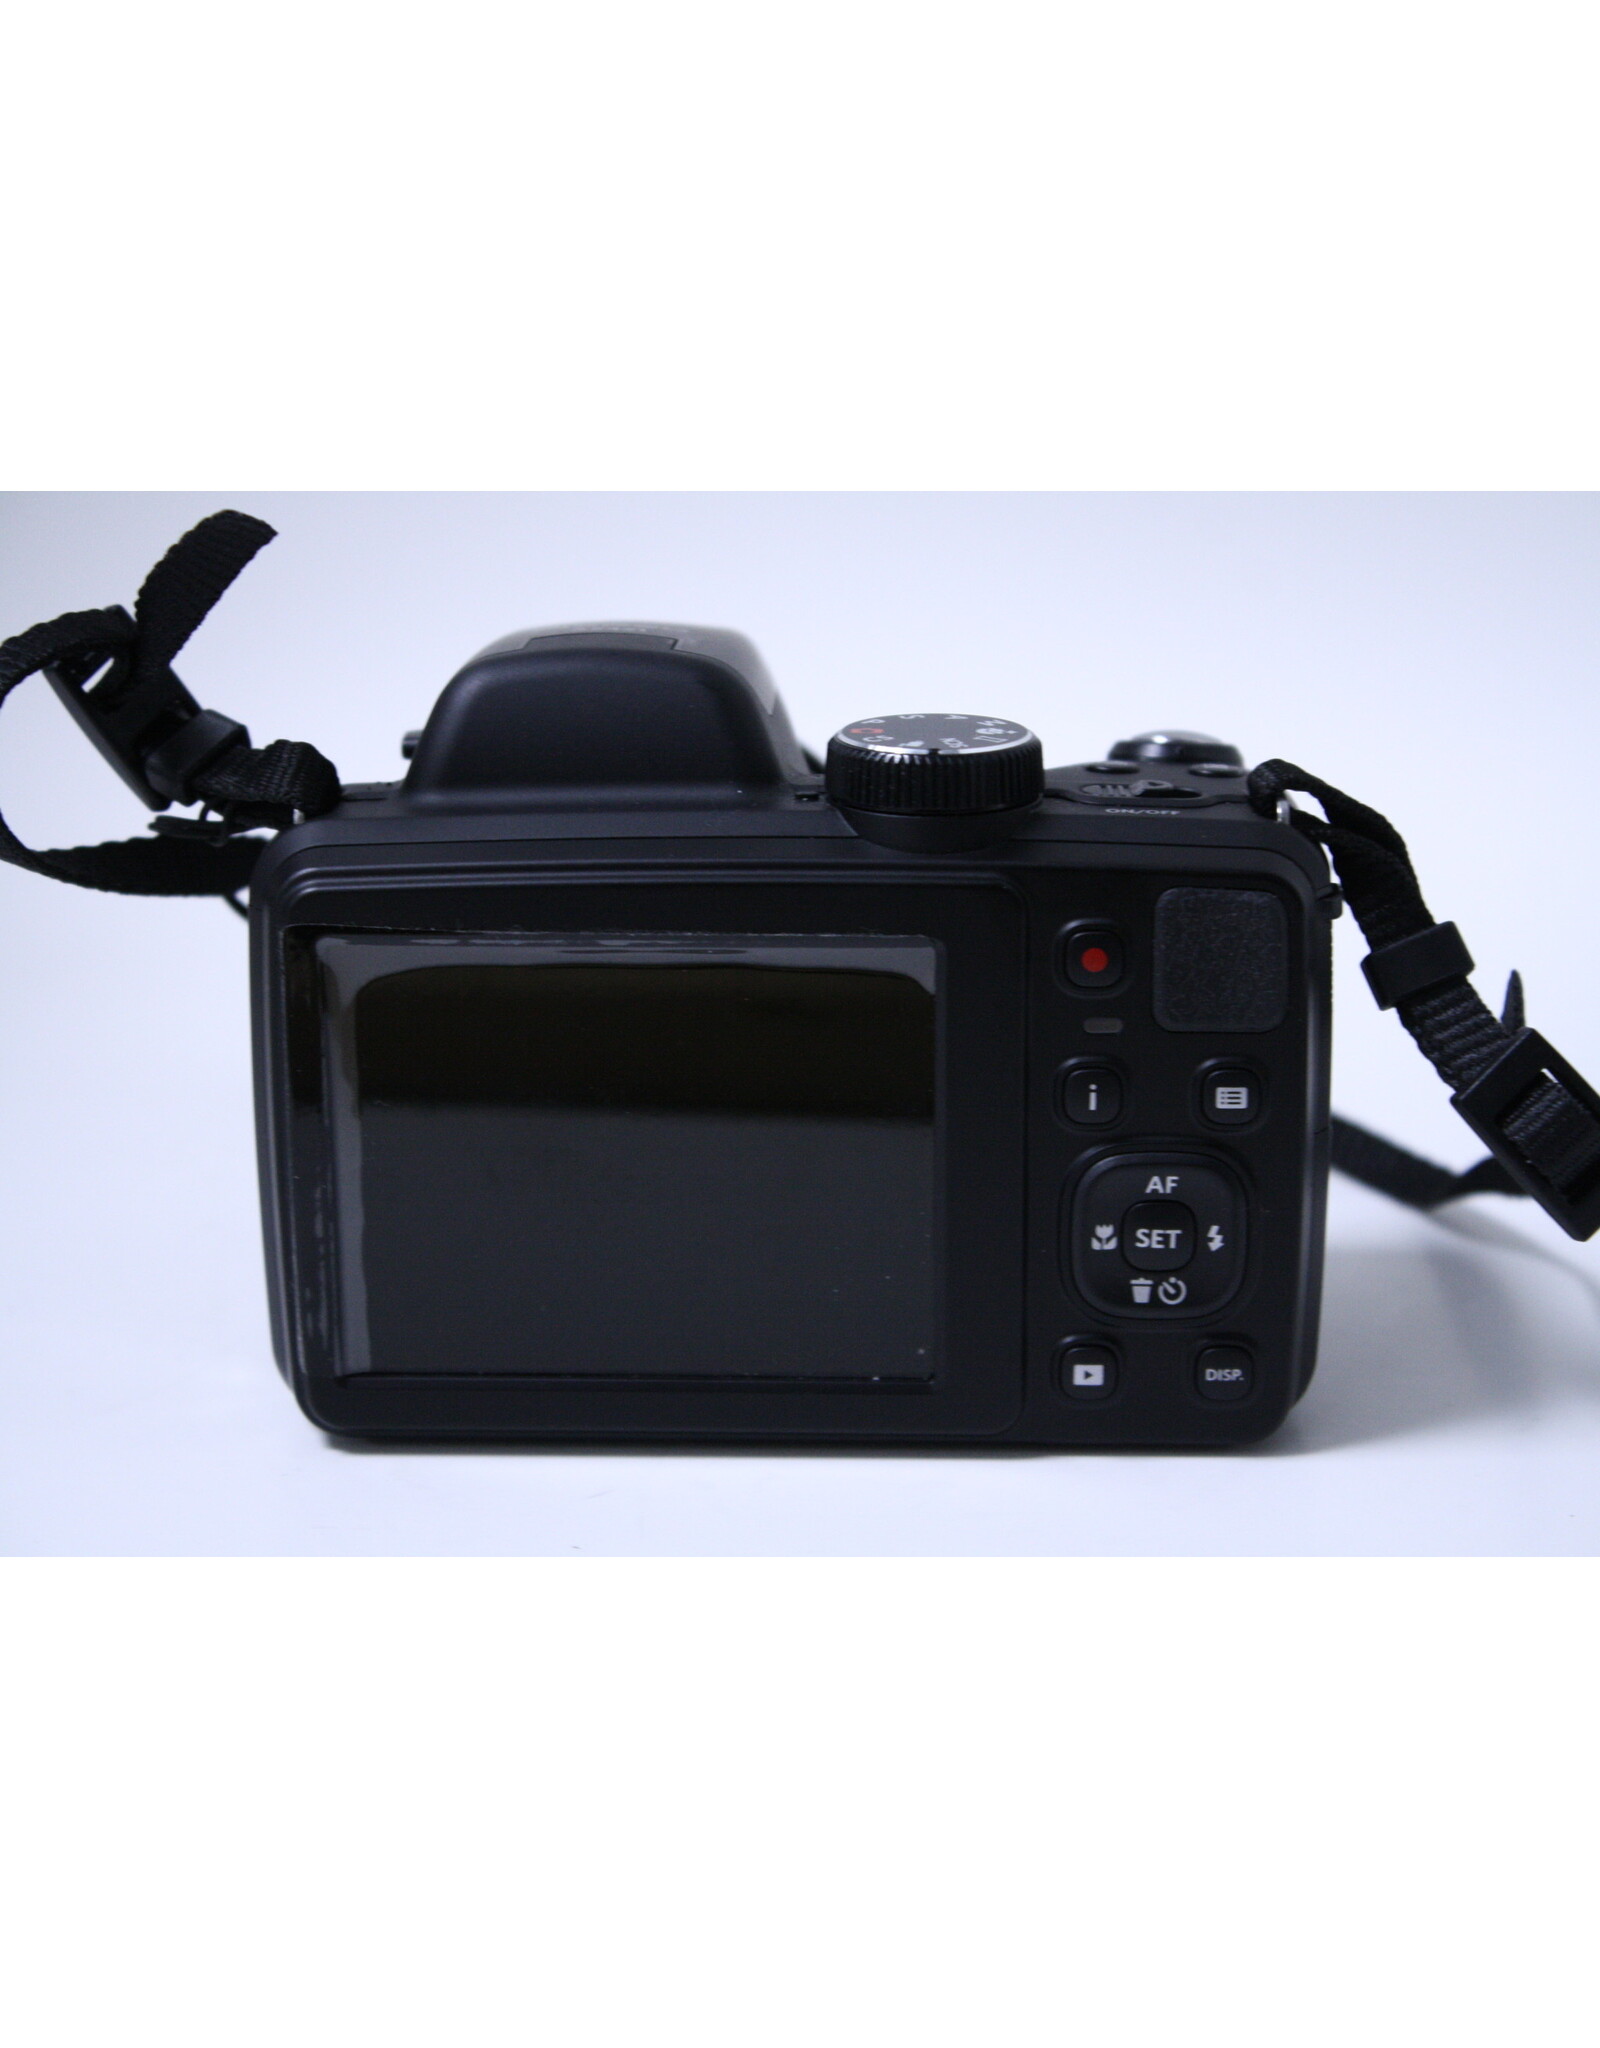 Kodak AZ421 PIXPRO Astro 16 MP Digital Camera w/ 42X Zoom, 3" LCD WITH FREE CHARGER! (Pre-owned)